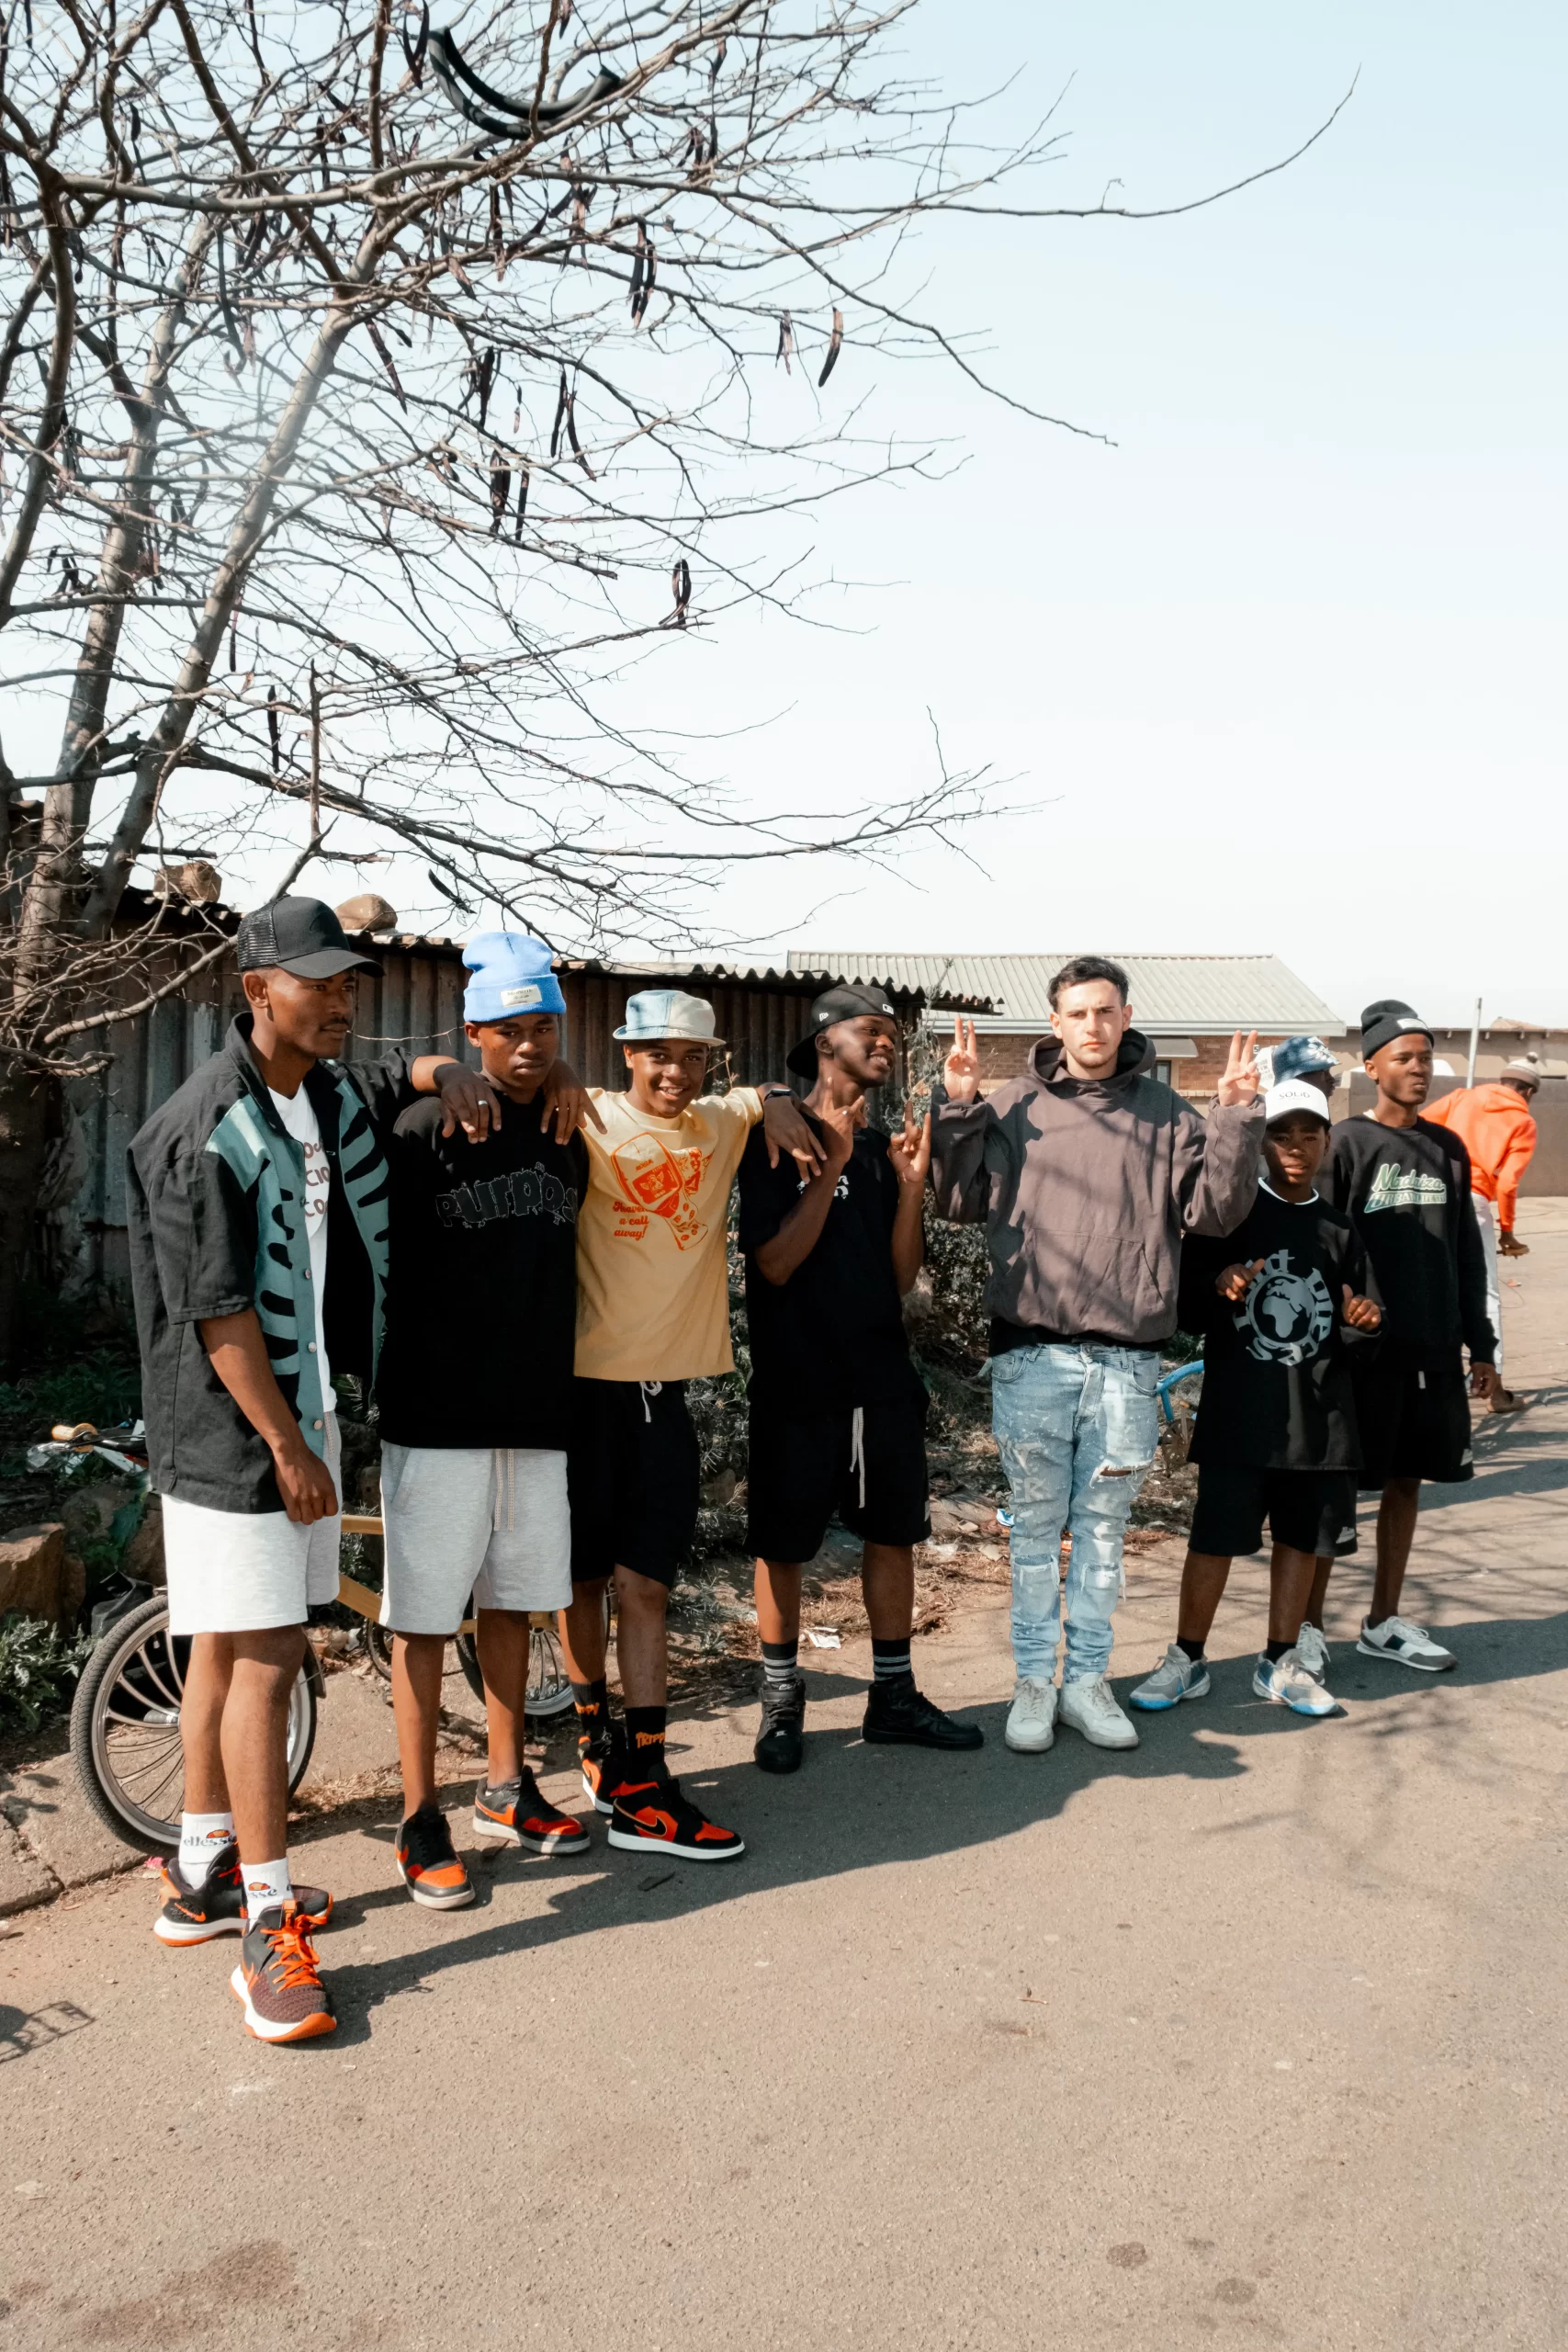 The Soweto Street Fighters' collaboration with Garm. A story of their contribution to the Stance Community